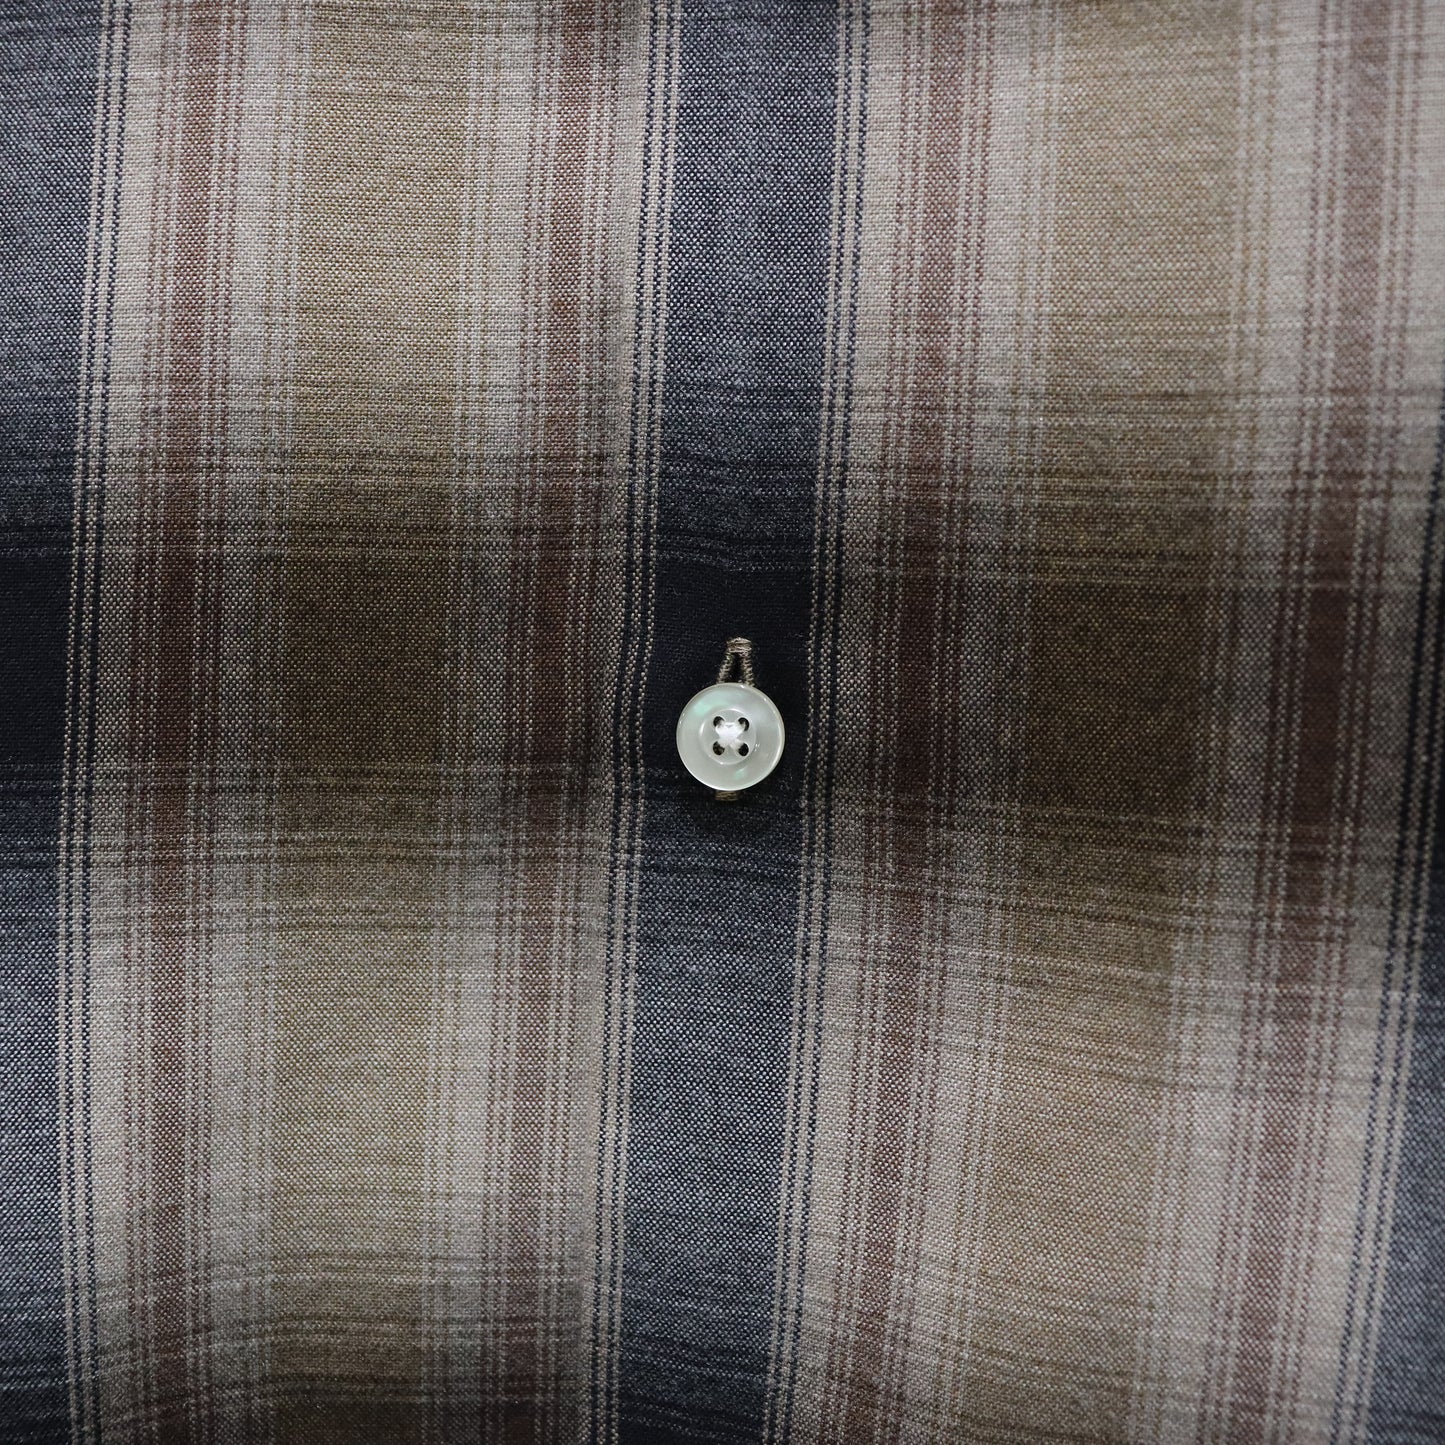 wt_OMBRE CHECK OPEN COLLAR SHIRT L/S -TYPE 4- #BROWN [23FW-WMS-OC04]